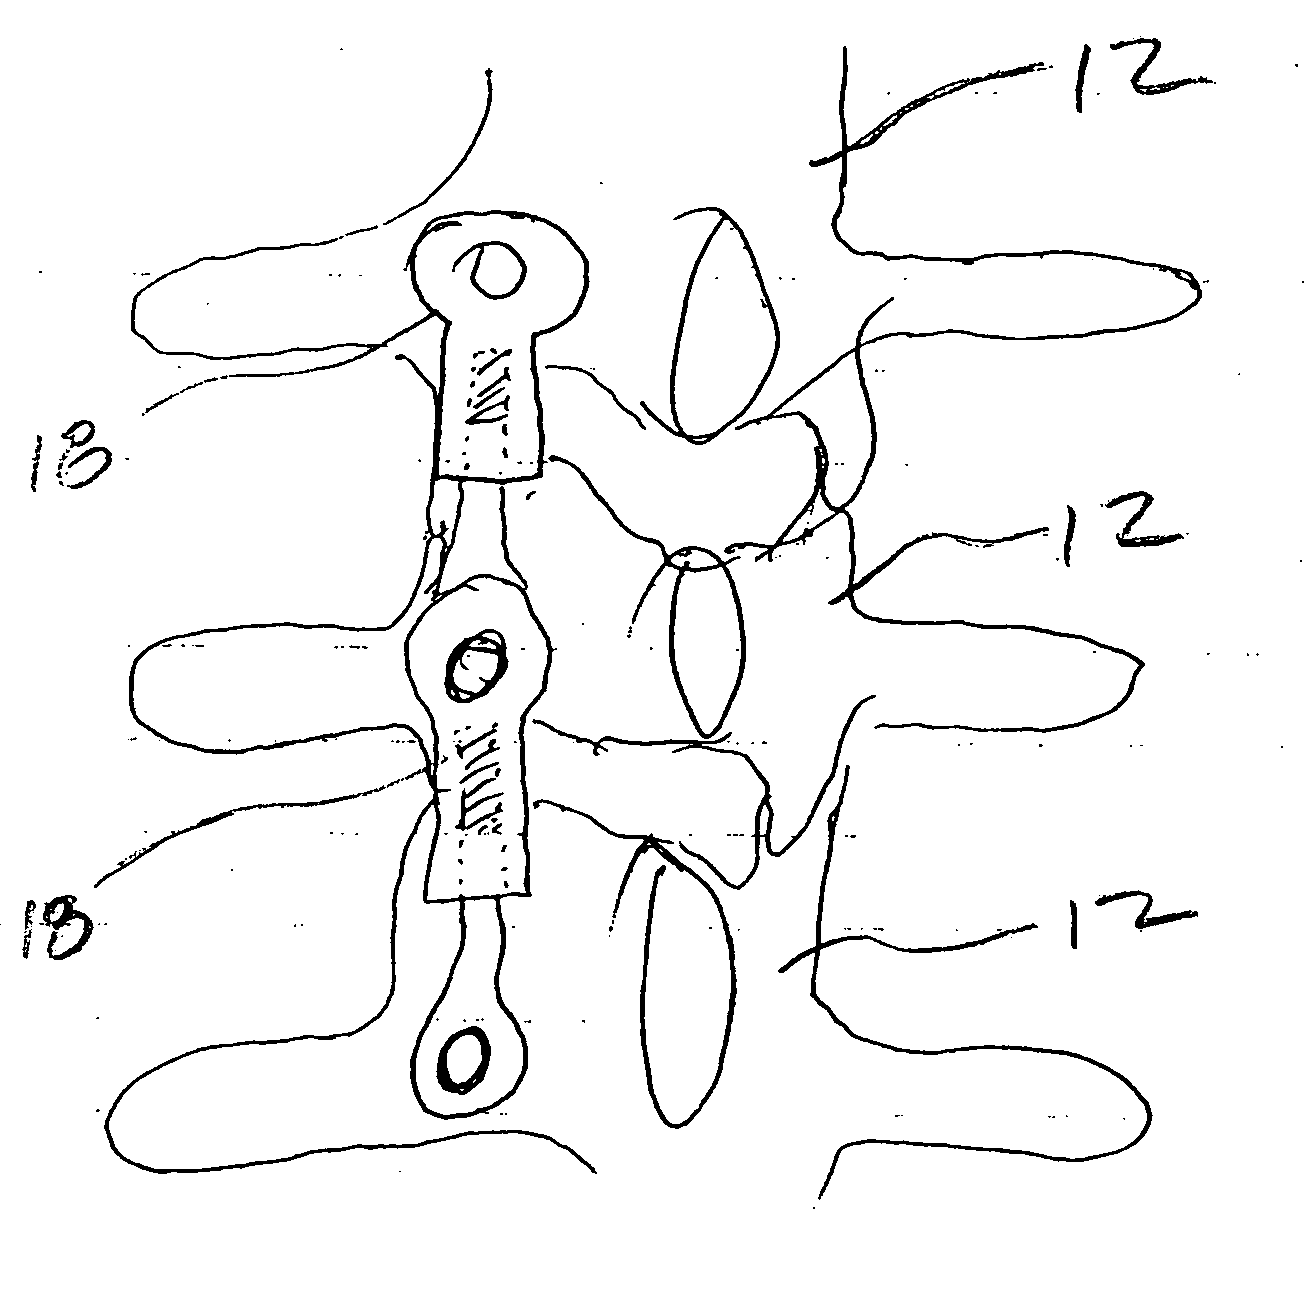 Apparatus and method for concave scoliosis expansion